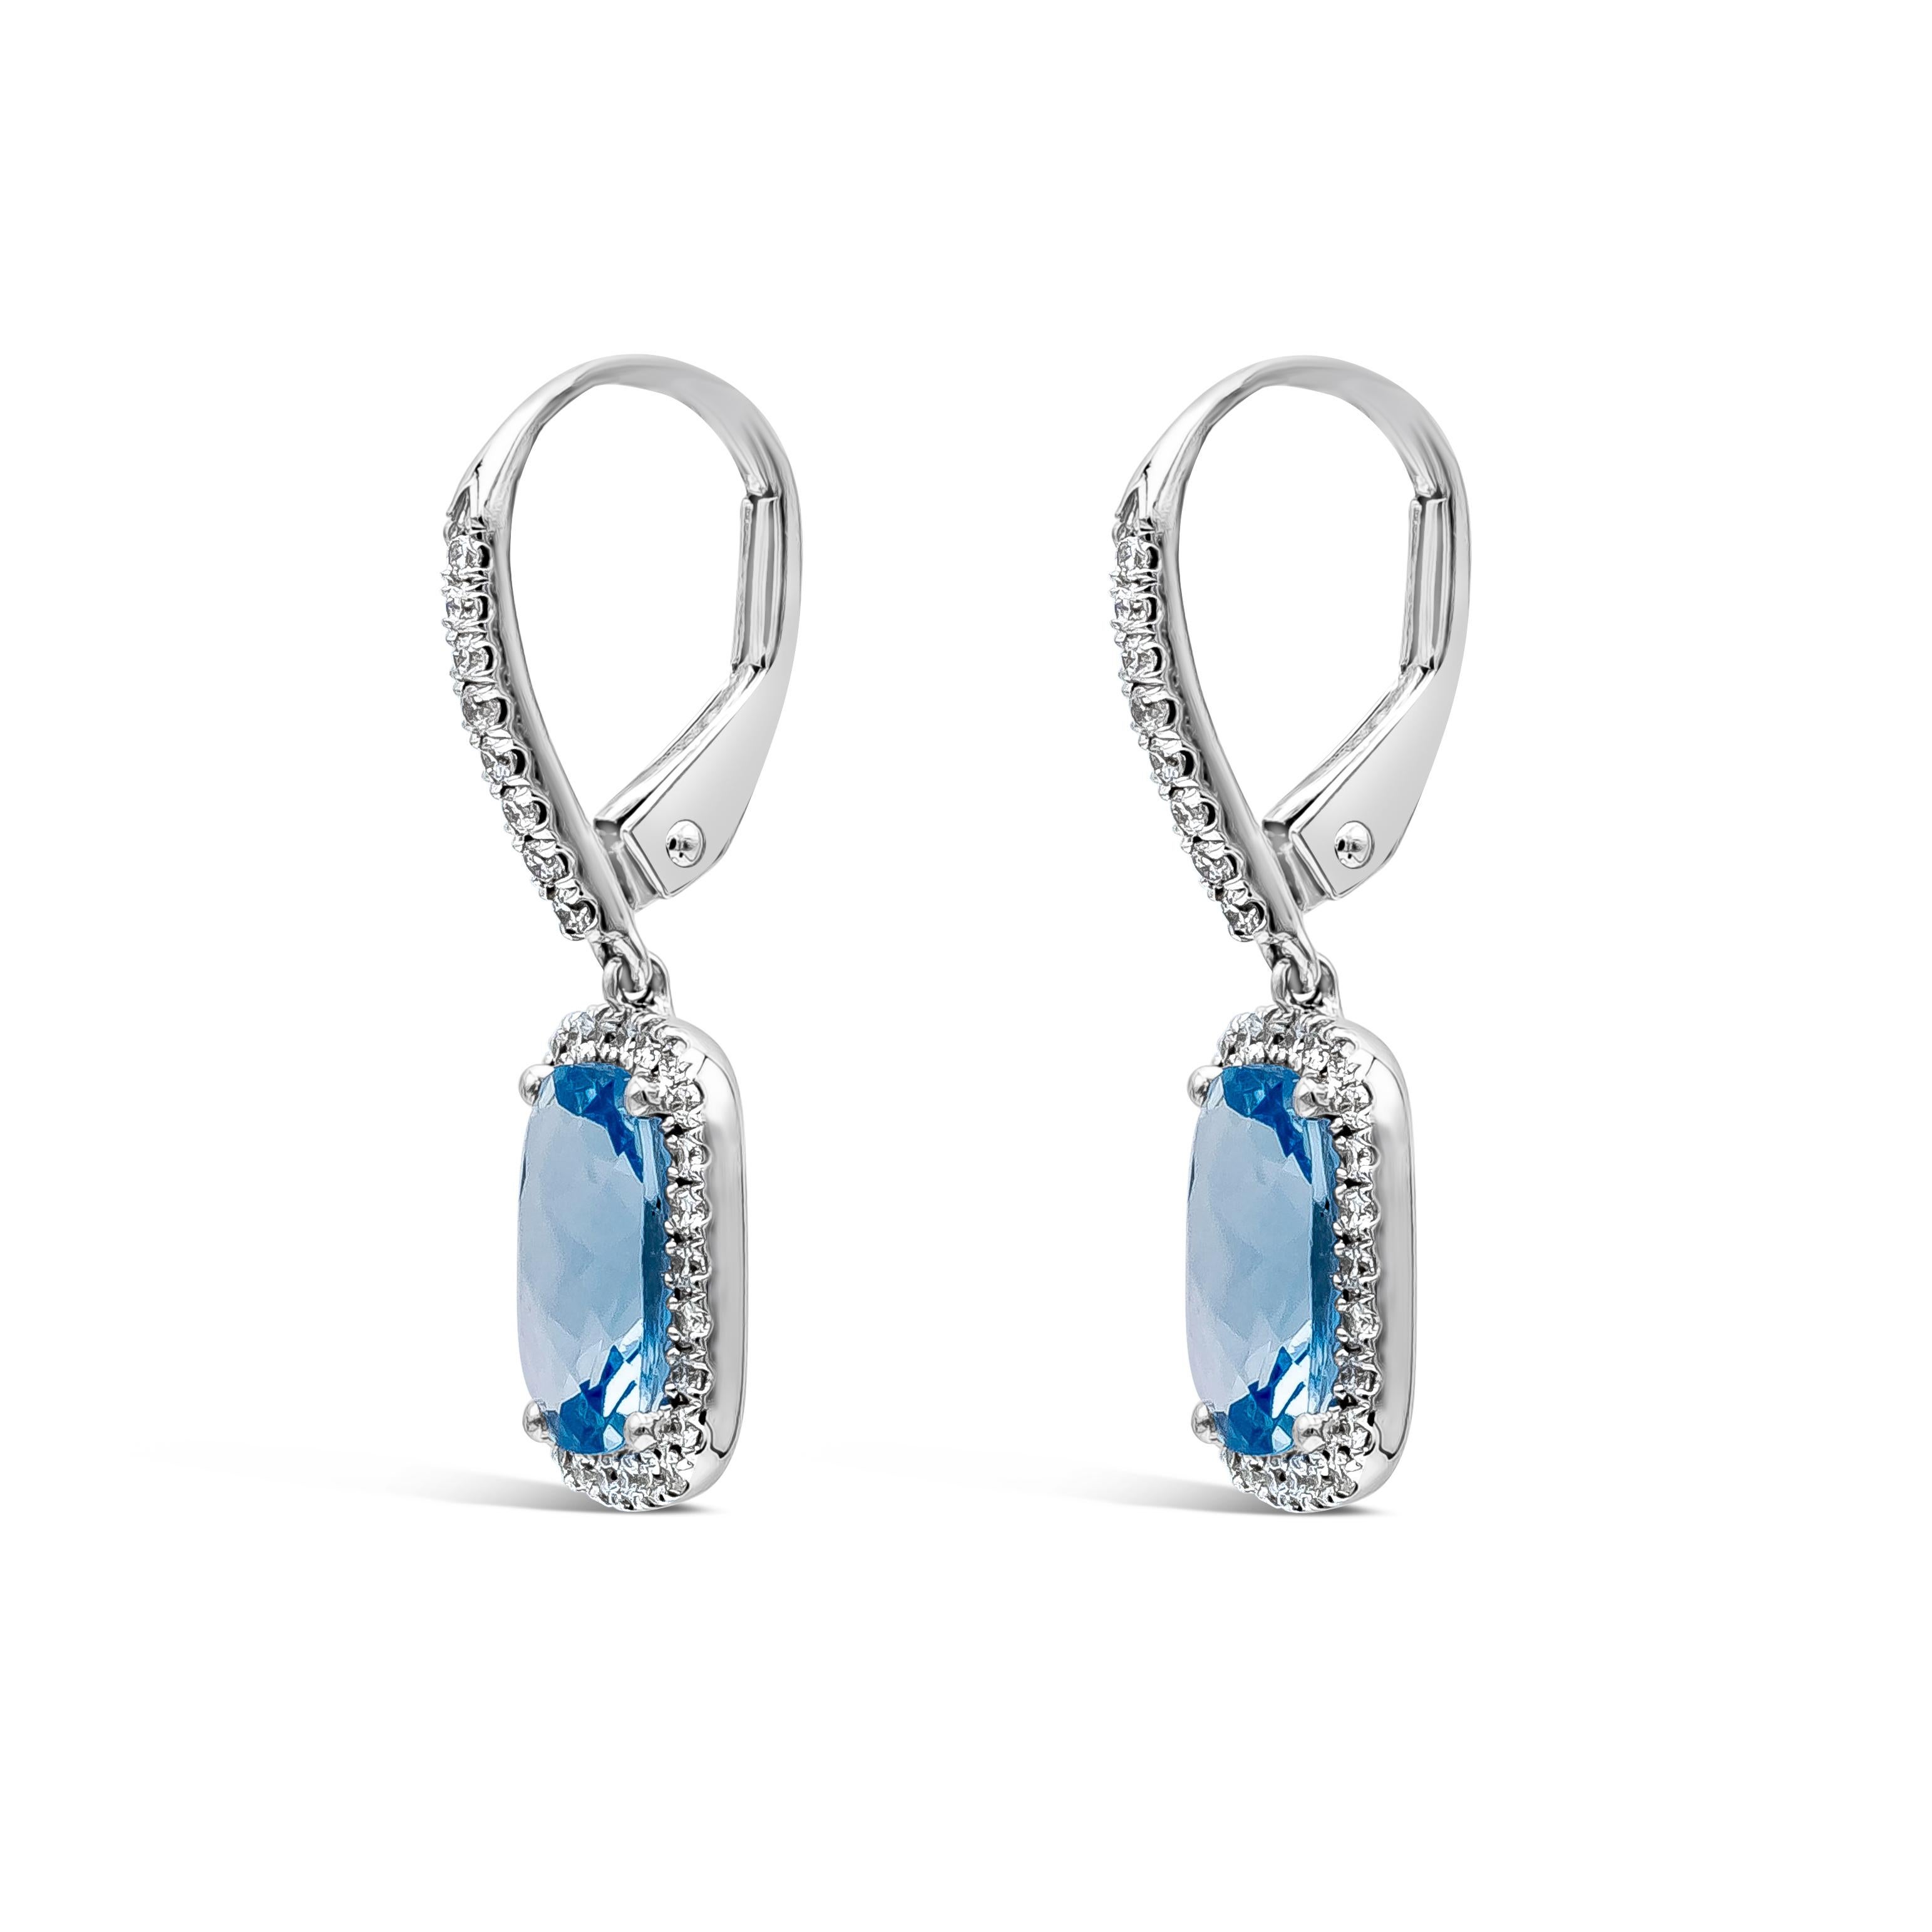 This gorgeous pair of drop earrings is showcasing a cushion cut aquamarines weighing 2.25 carats total, surrounded by a row of round brilliant diamonds weighing 0.33 carats total, F Color and VS in Clarity. Made with 18K White Gold.

Roman Malakov